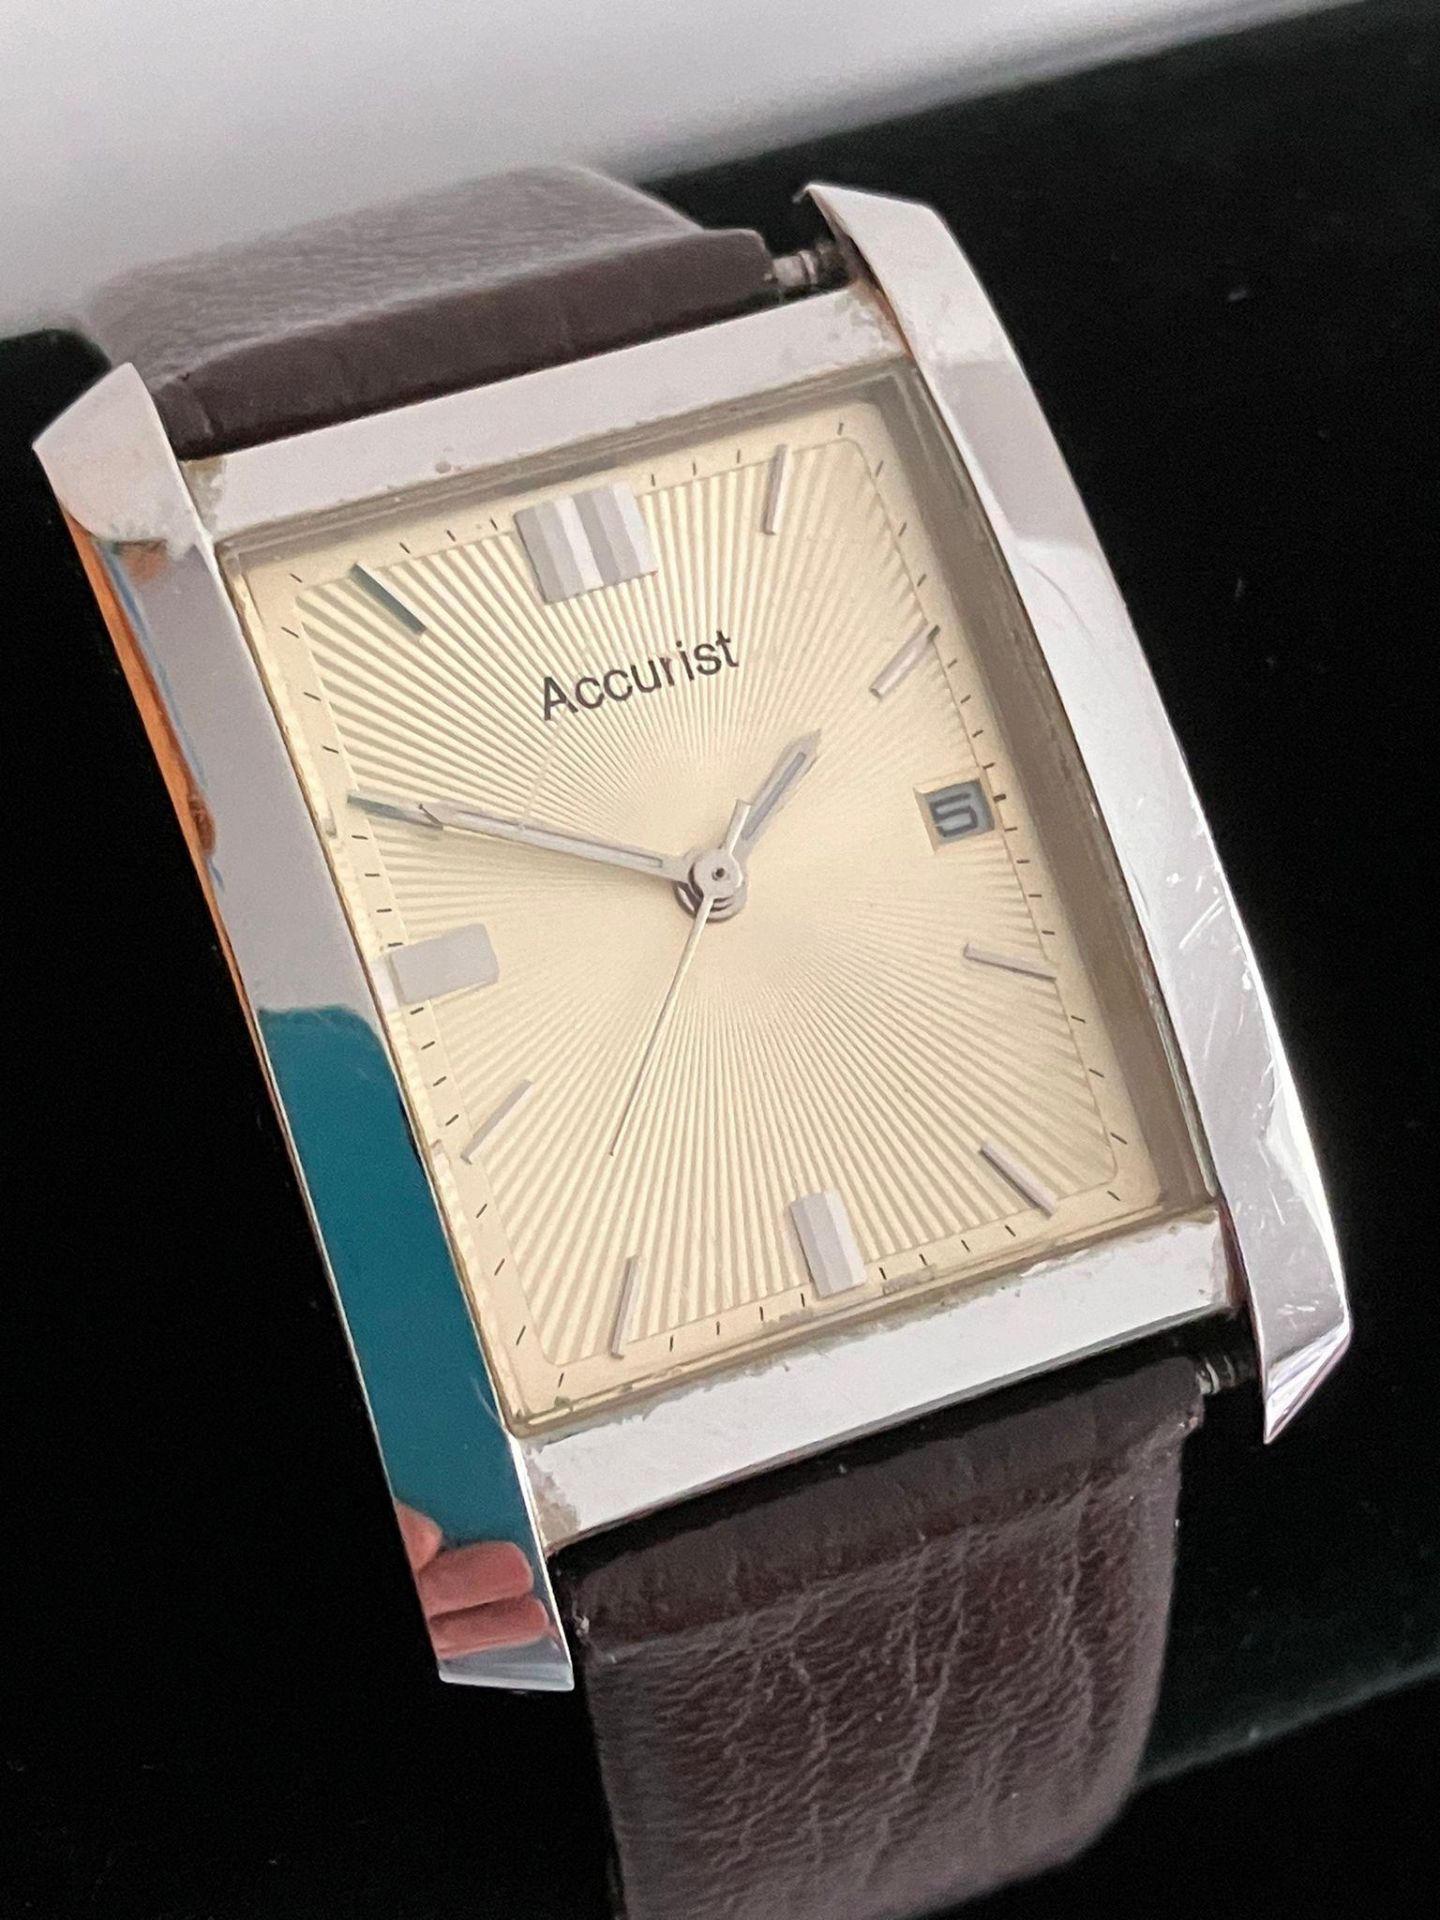 Gentlemans ACCURIST QUARTZ WRISTWATCH. Finished in stainless steel with a golden Sun Ray face.